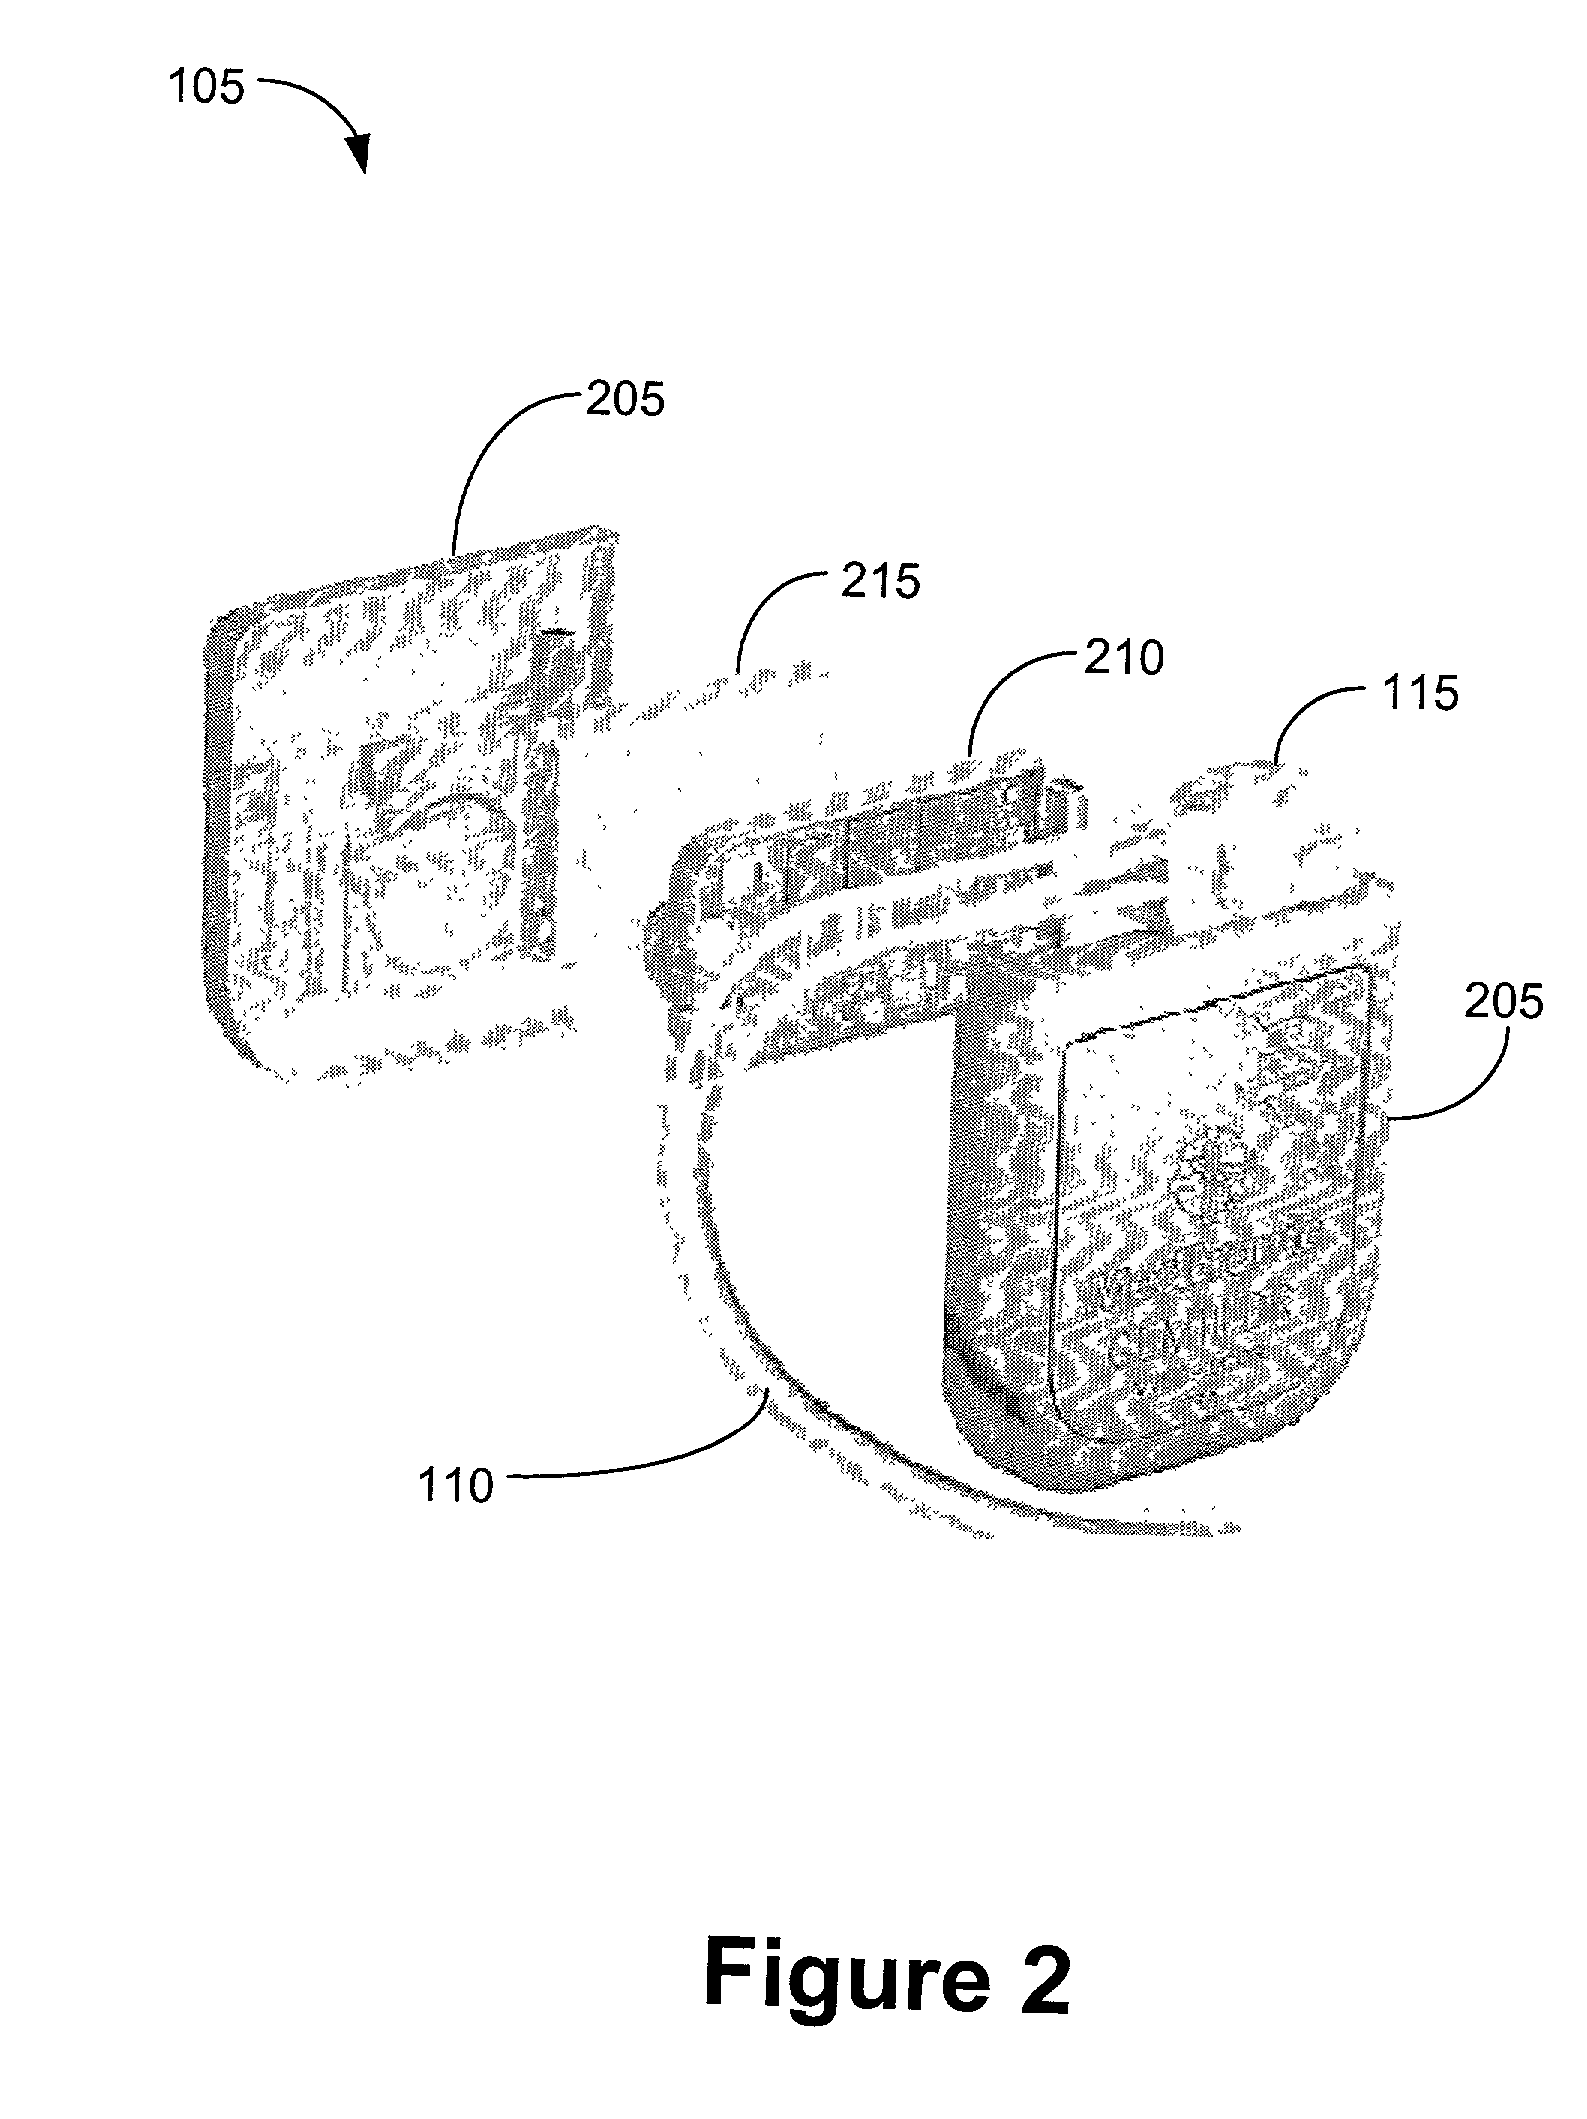 Method and apparatus for controlling an implantable medical device in response to the presence of a magnetic field and/or high frequency radiation interference signals